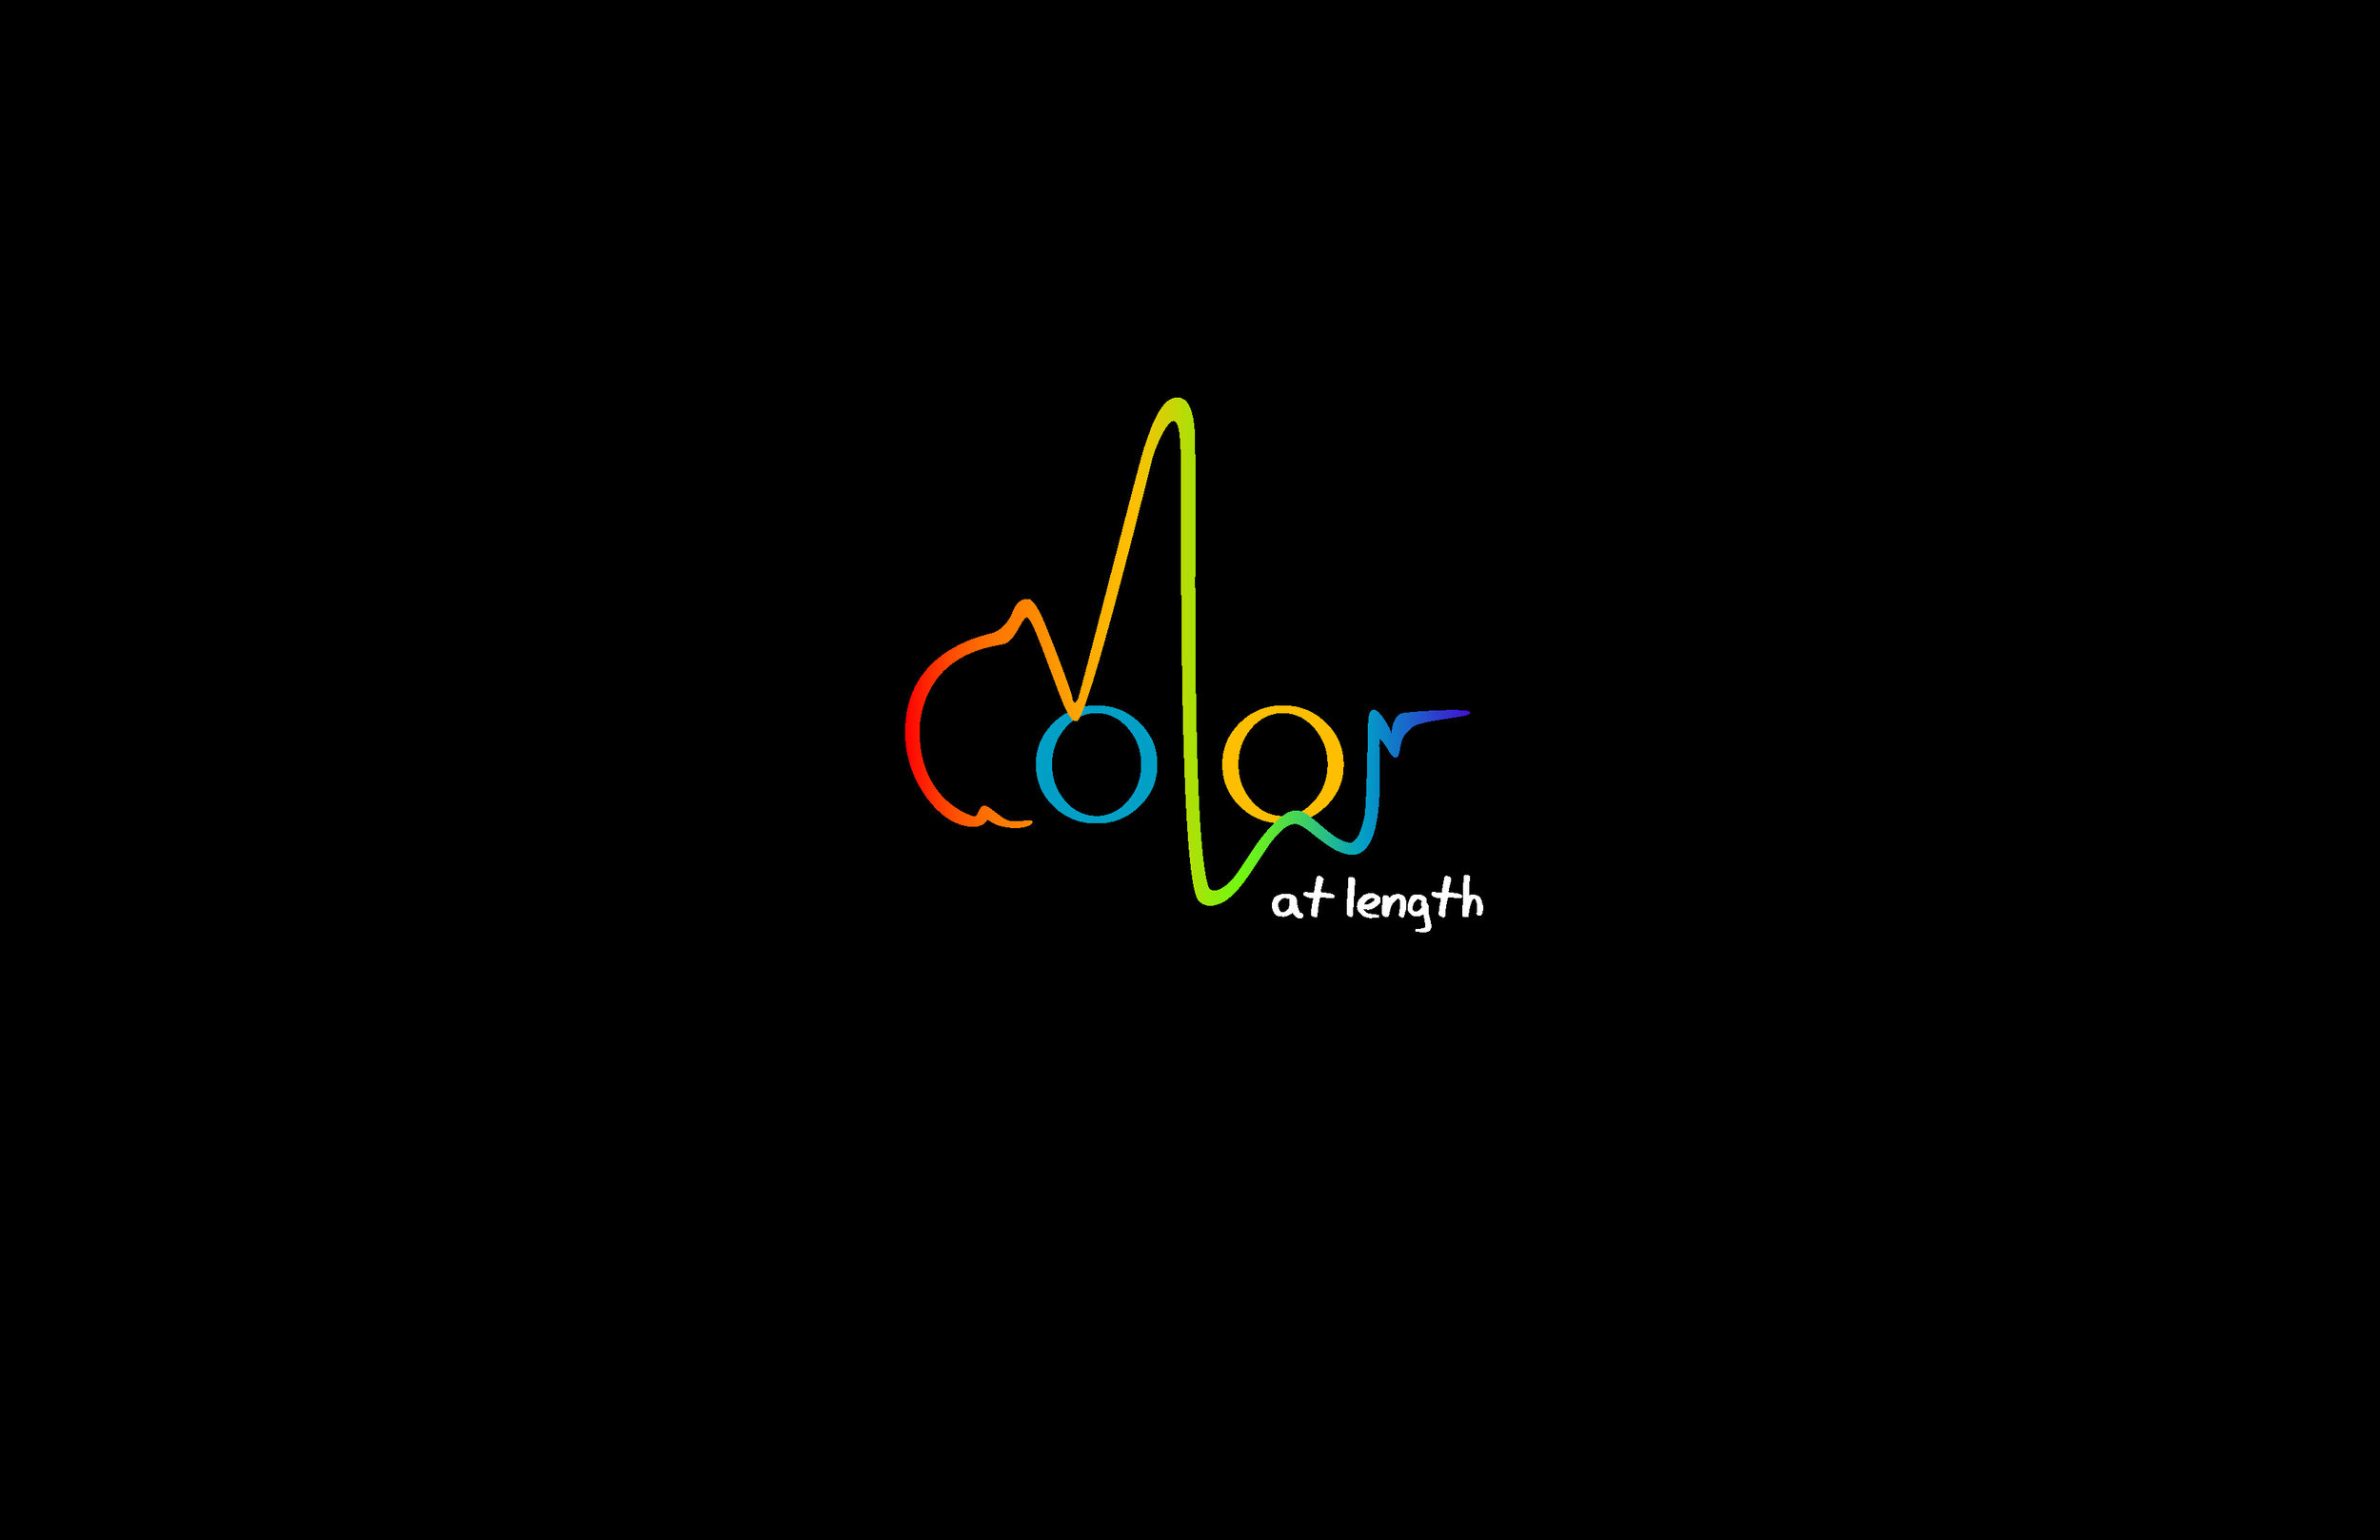 Color At Length Design BriefSmall_Page_01.jpg